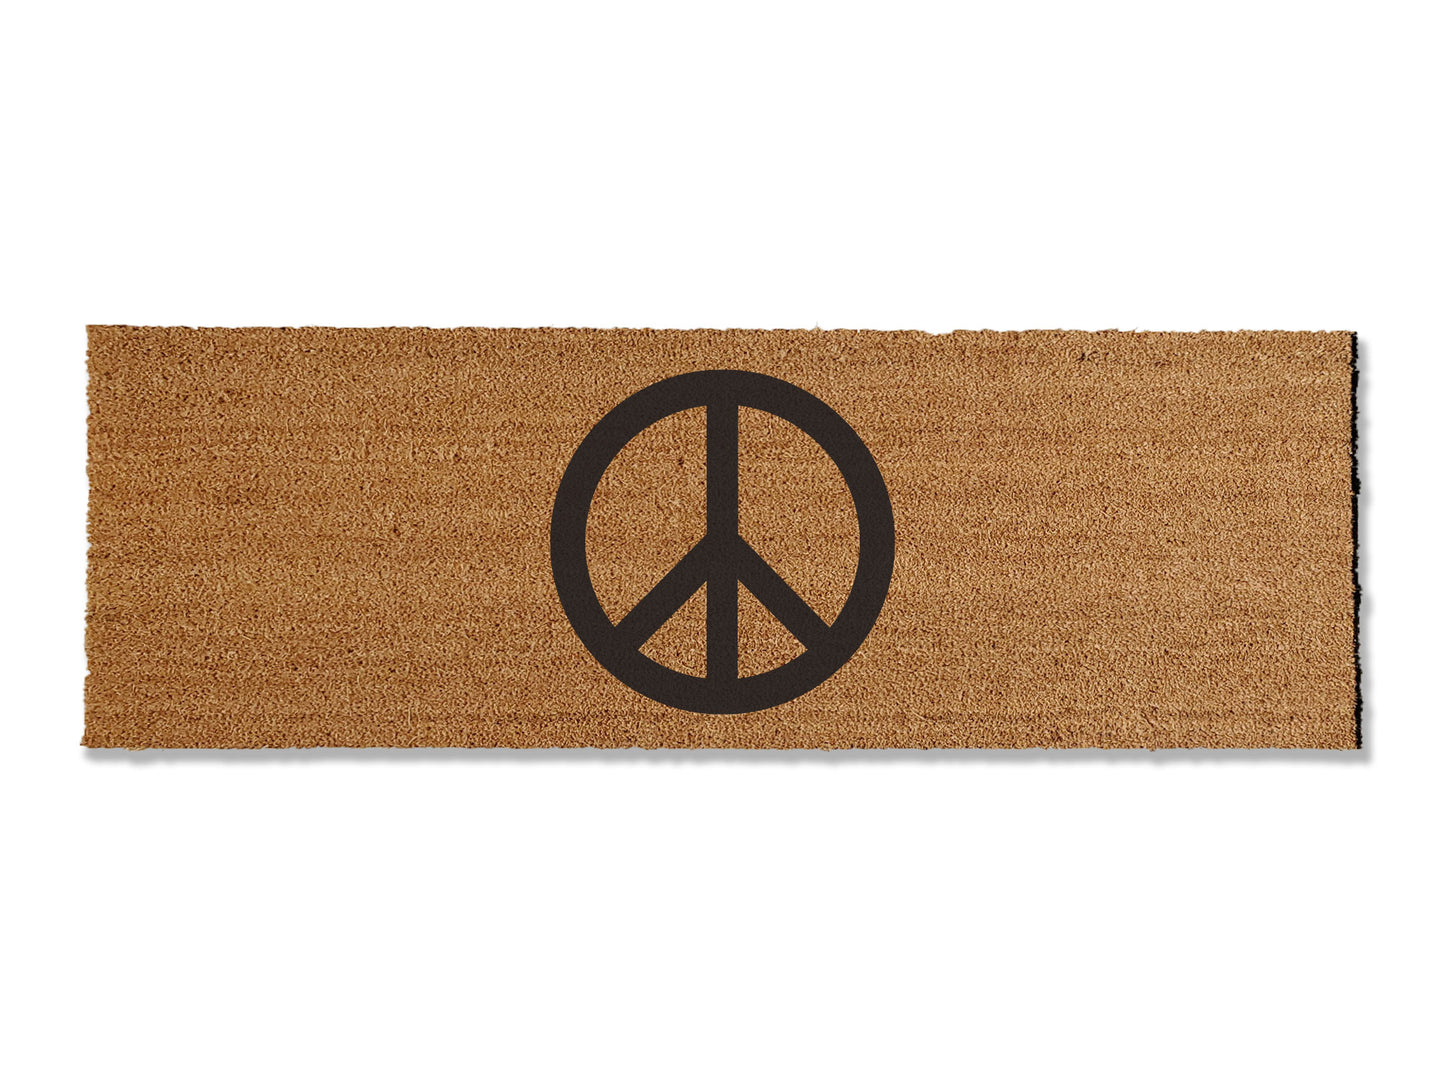 Add a touch of peace to your entryway with our coir doormat featuring a peace sign. The perfect addition to your home, this mat is sure to spread a sense of tranquility and welcome to all who enter. Elevate your doorstep with this stylish and meaningful coir doormat.